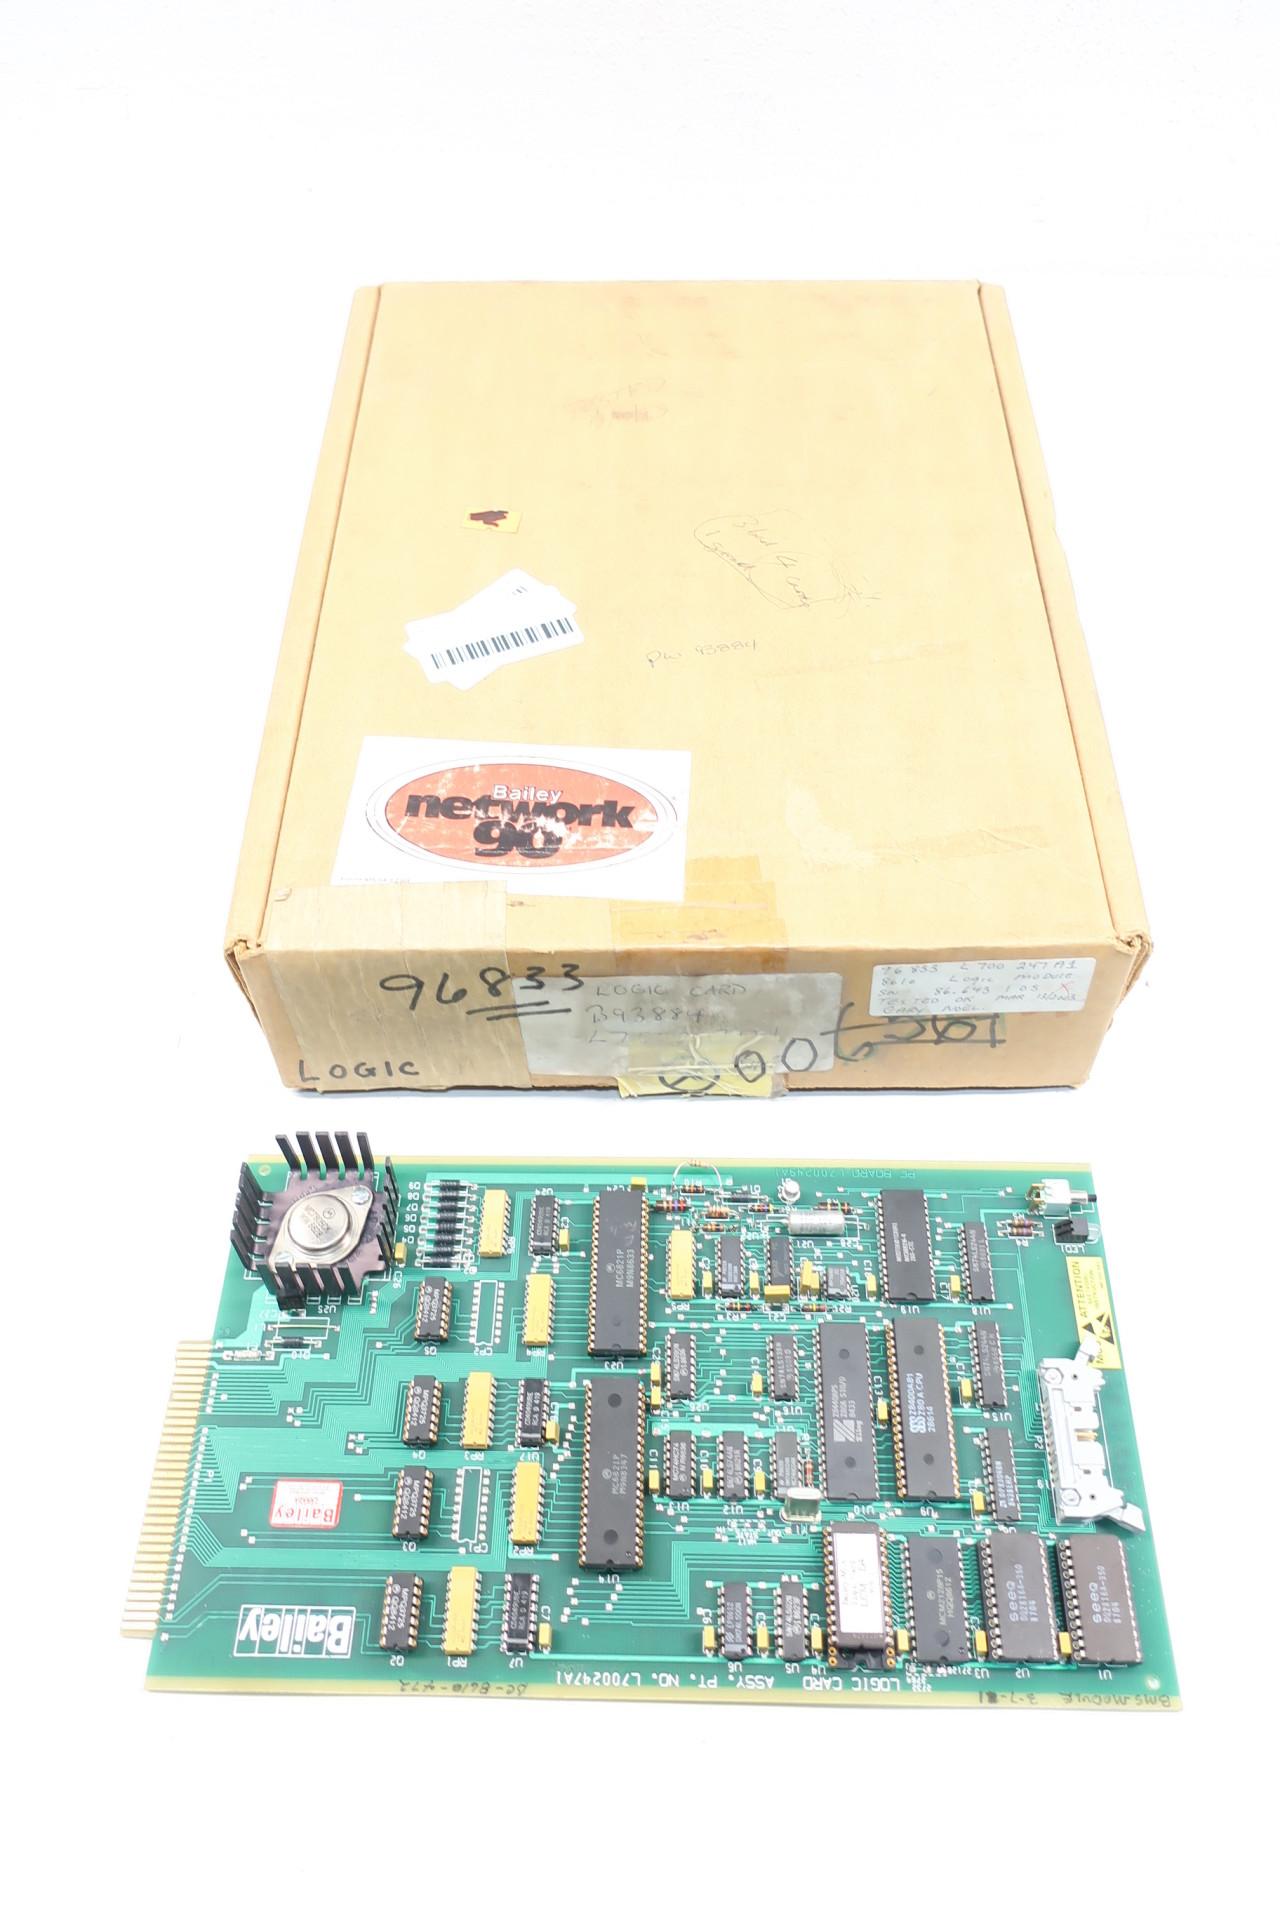 Details about   Bailey L700296A1 Supply Monitor Card Pcb Circuit Board 